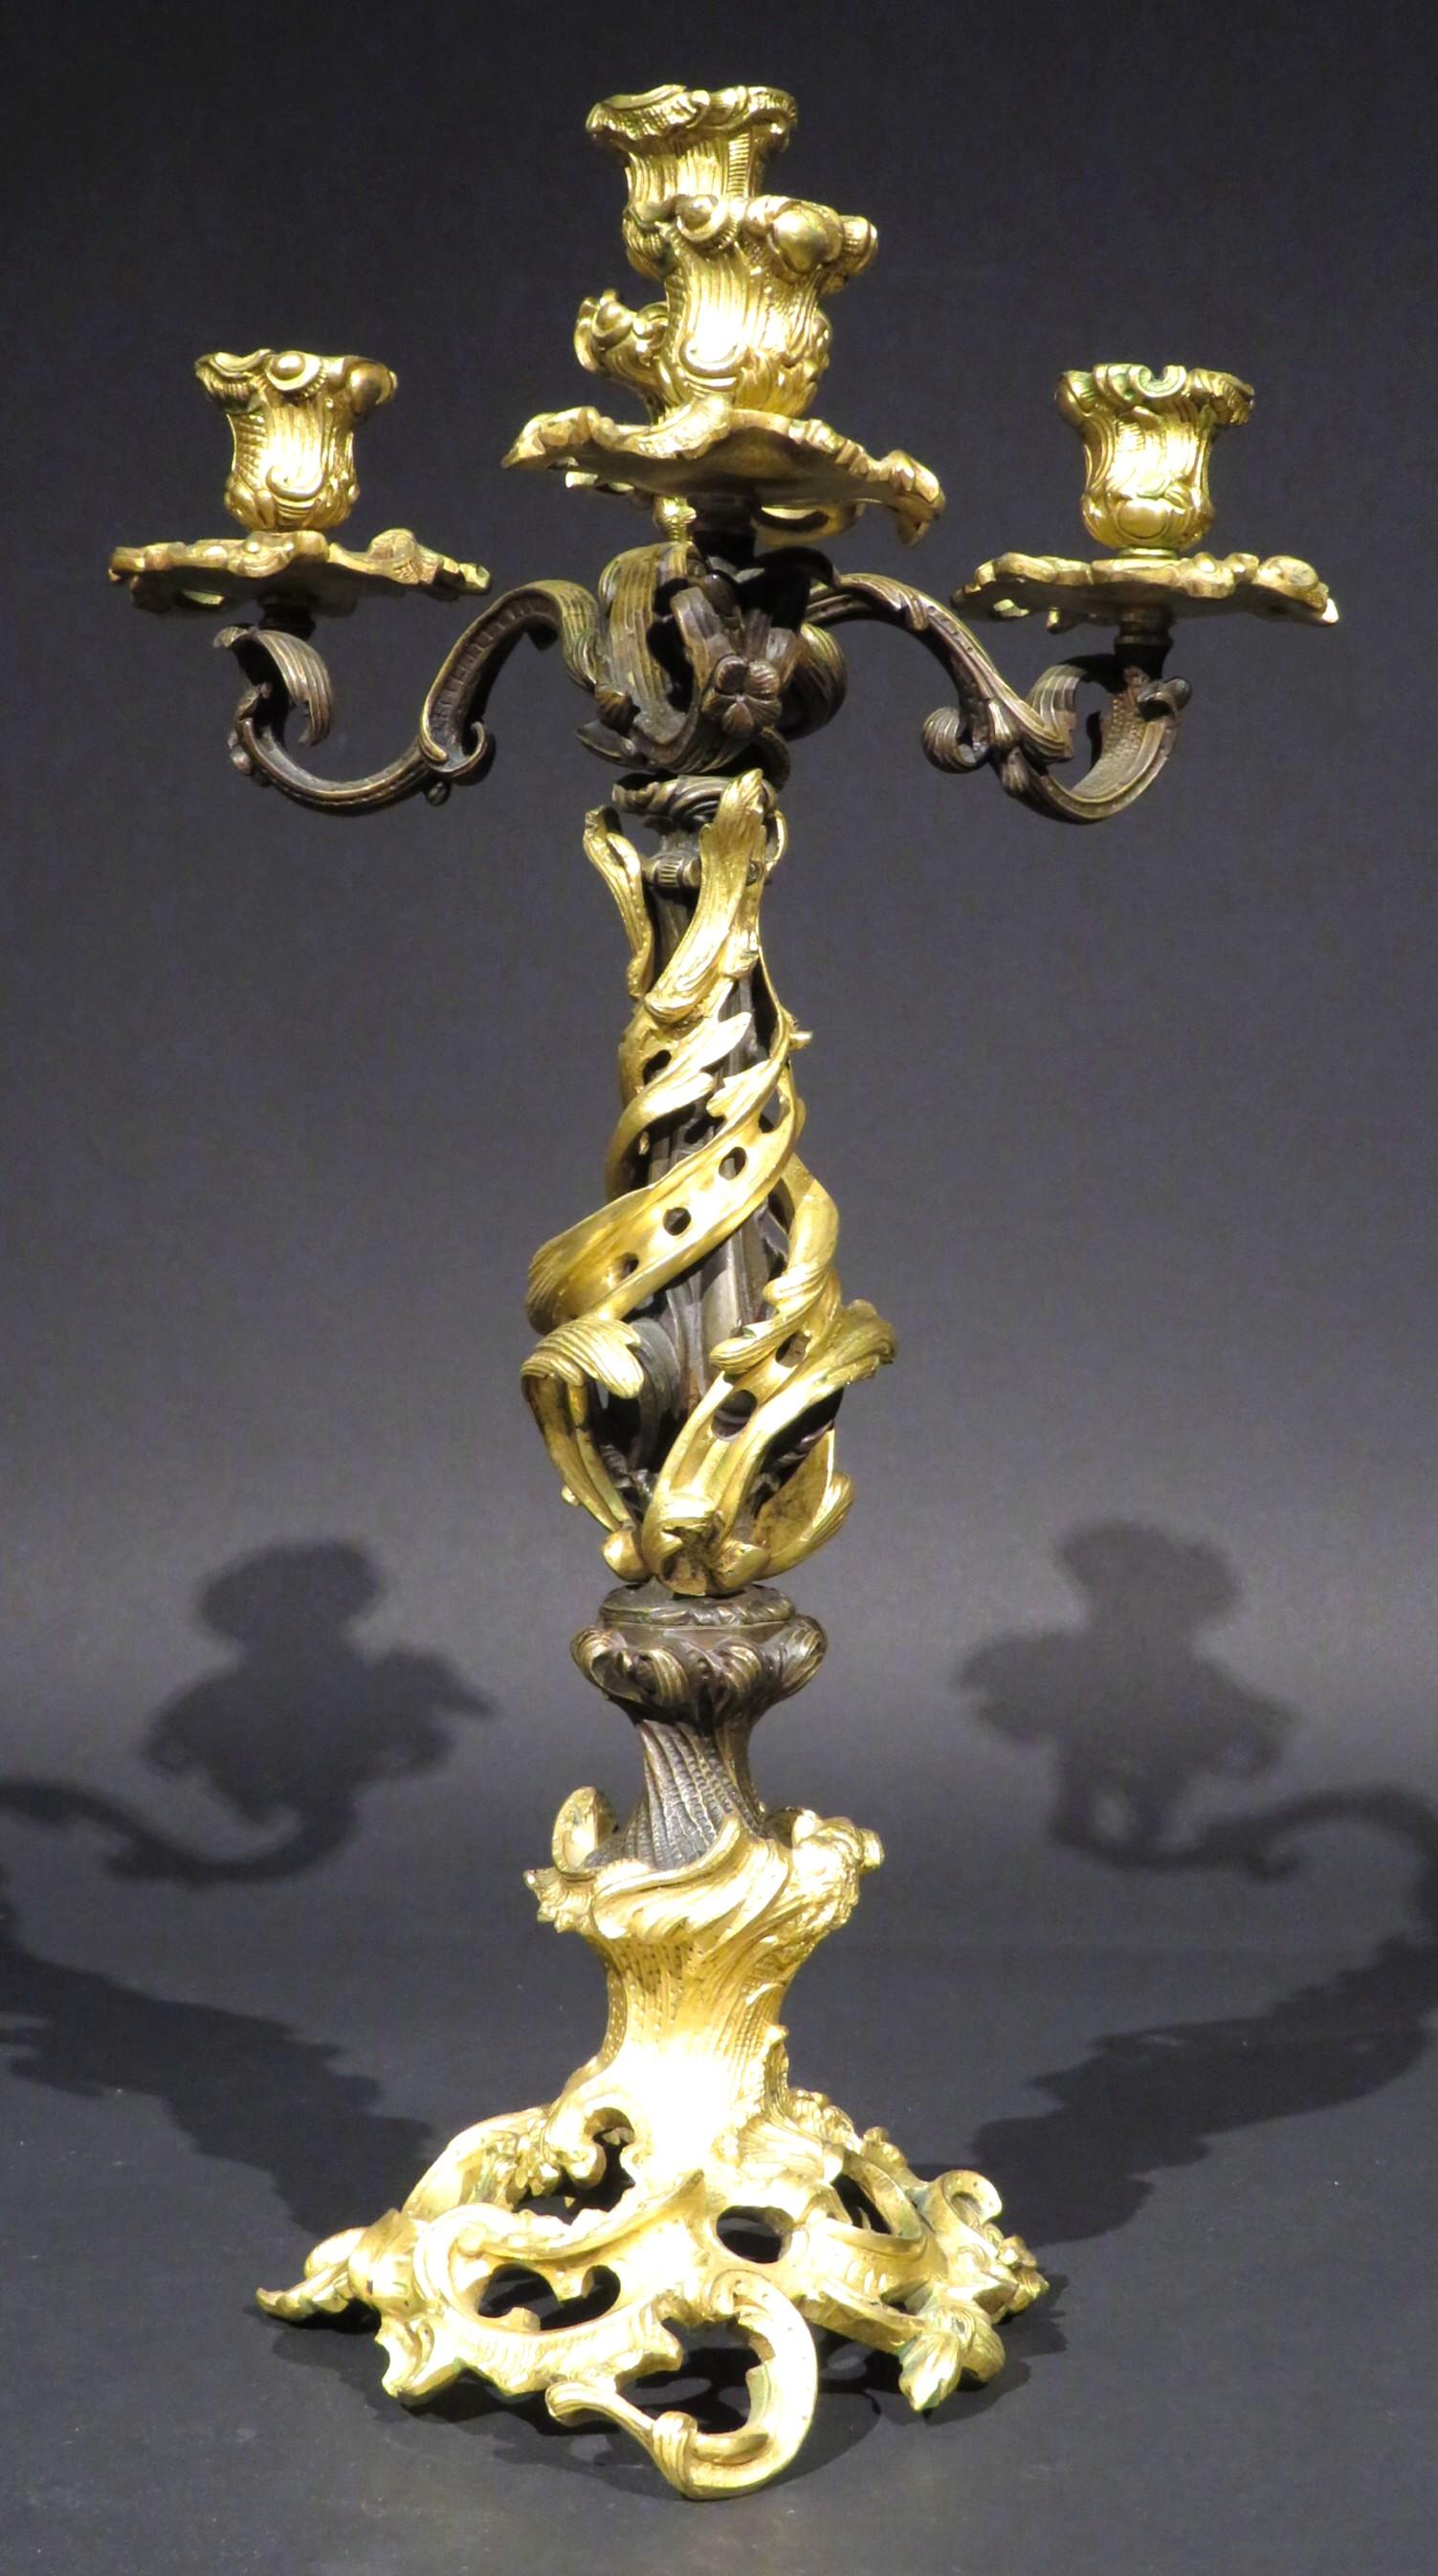 A stunning & superbly cast 19th century parcel gilt candelabrum in the Rococo taste, showing a sculptural central column of entwined bronze & parcel gilt bronze, rising from a pierced rocaille gilt bronze base to three foliate cast branches fitted